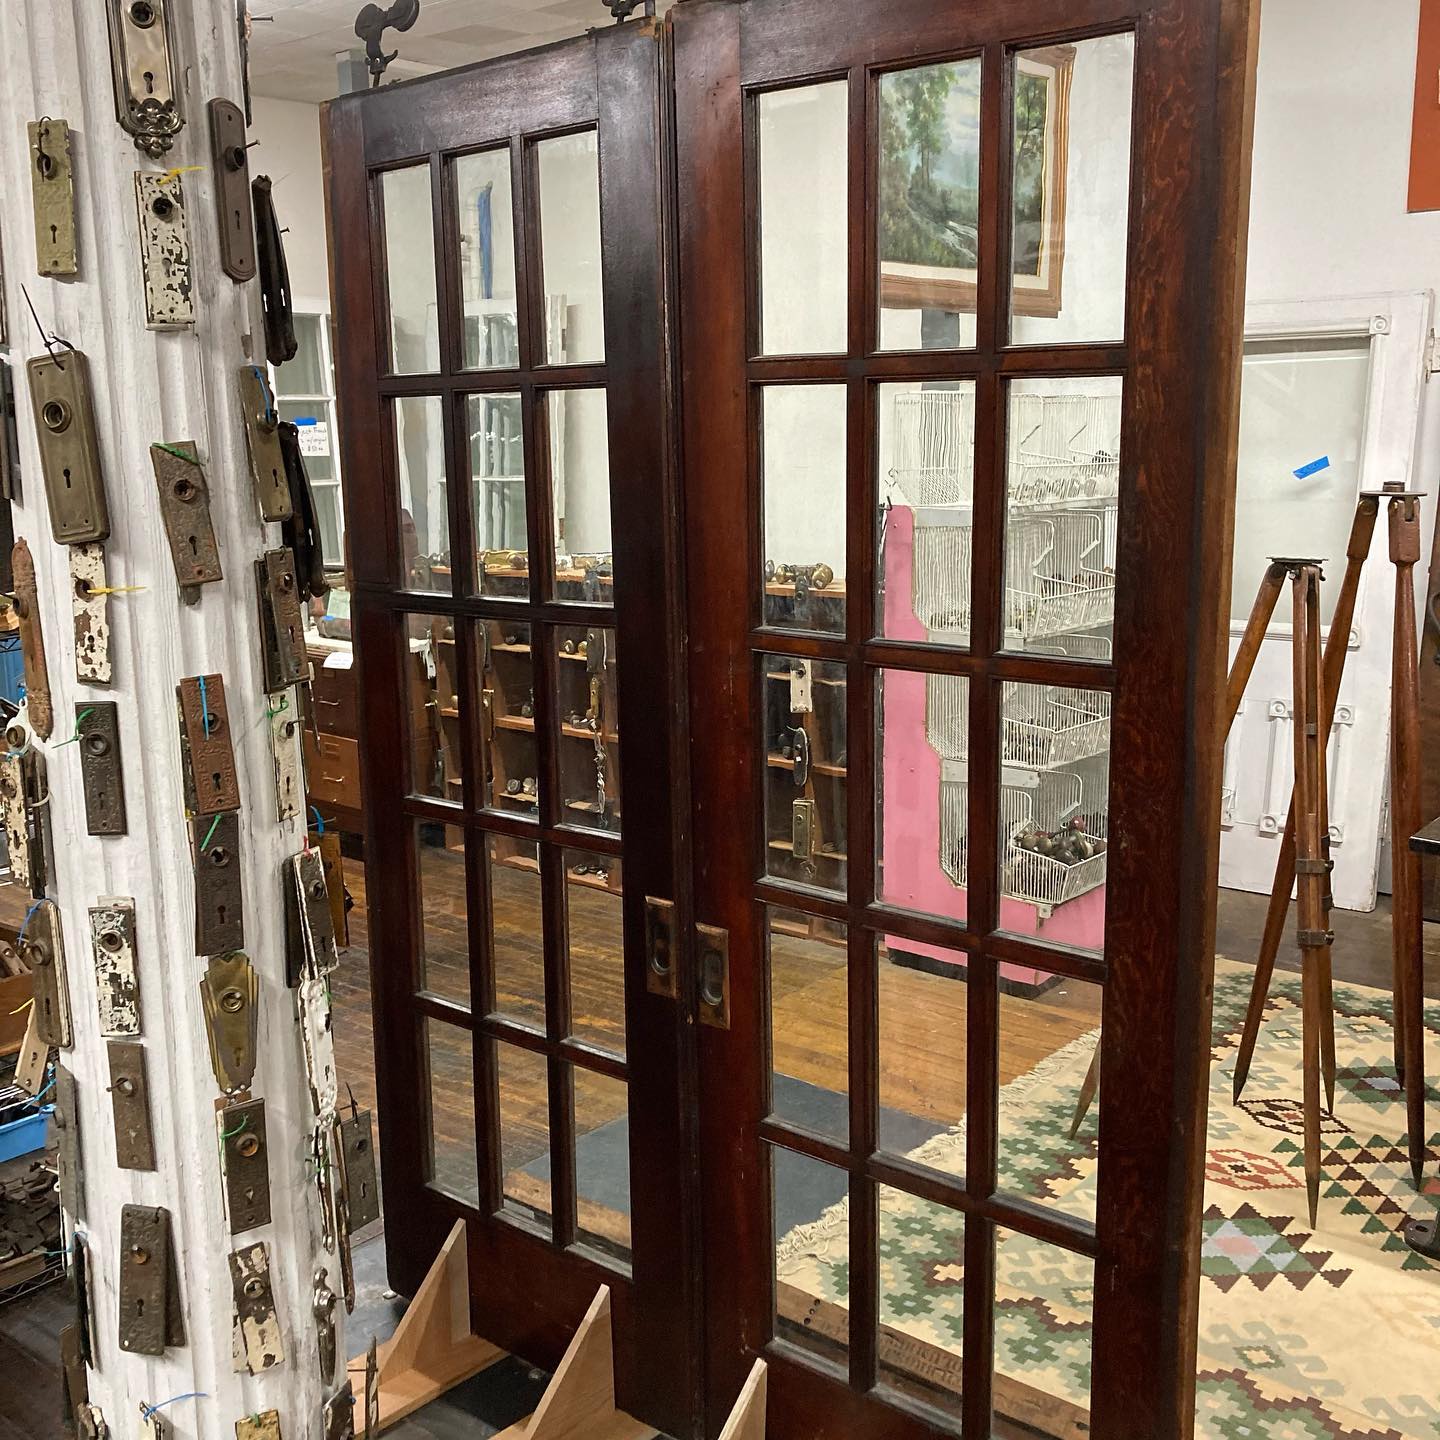 Antique Pocket Doors with Original Glass, Hardware, and Tracks